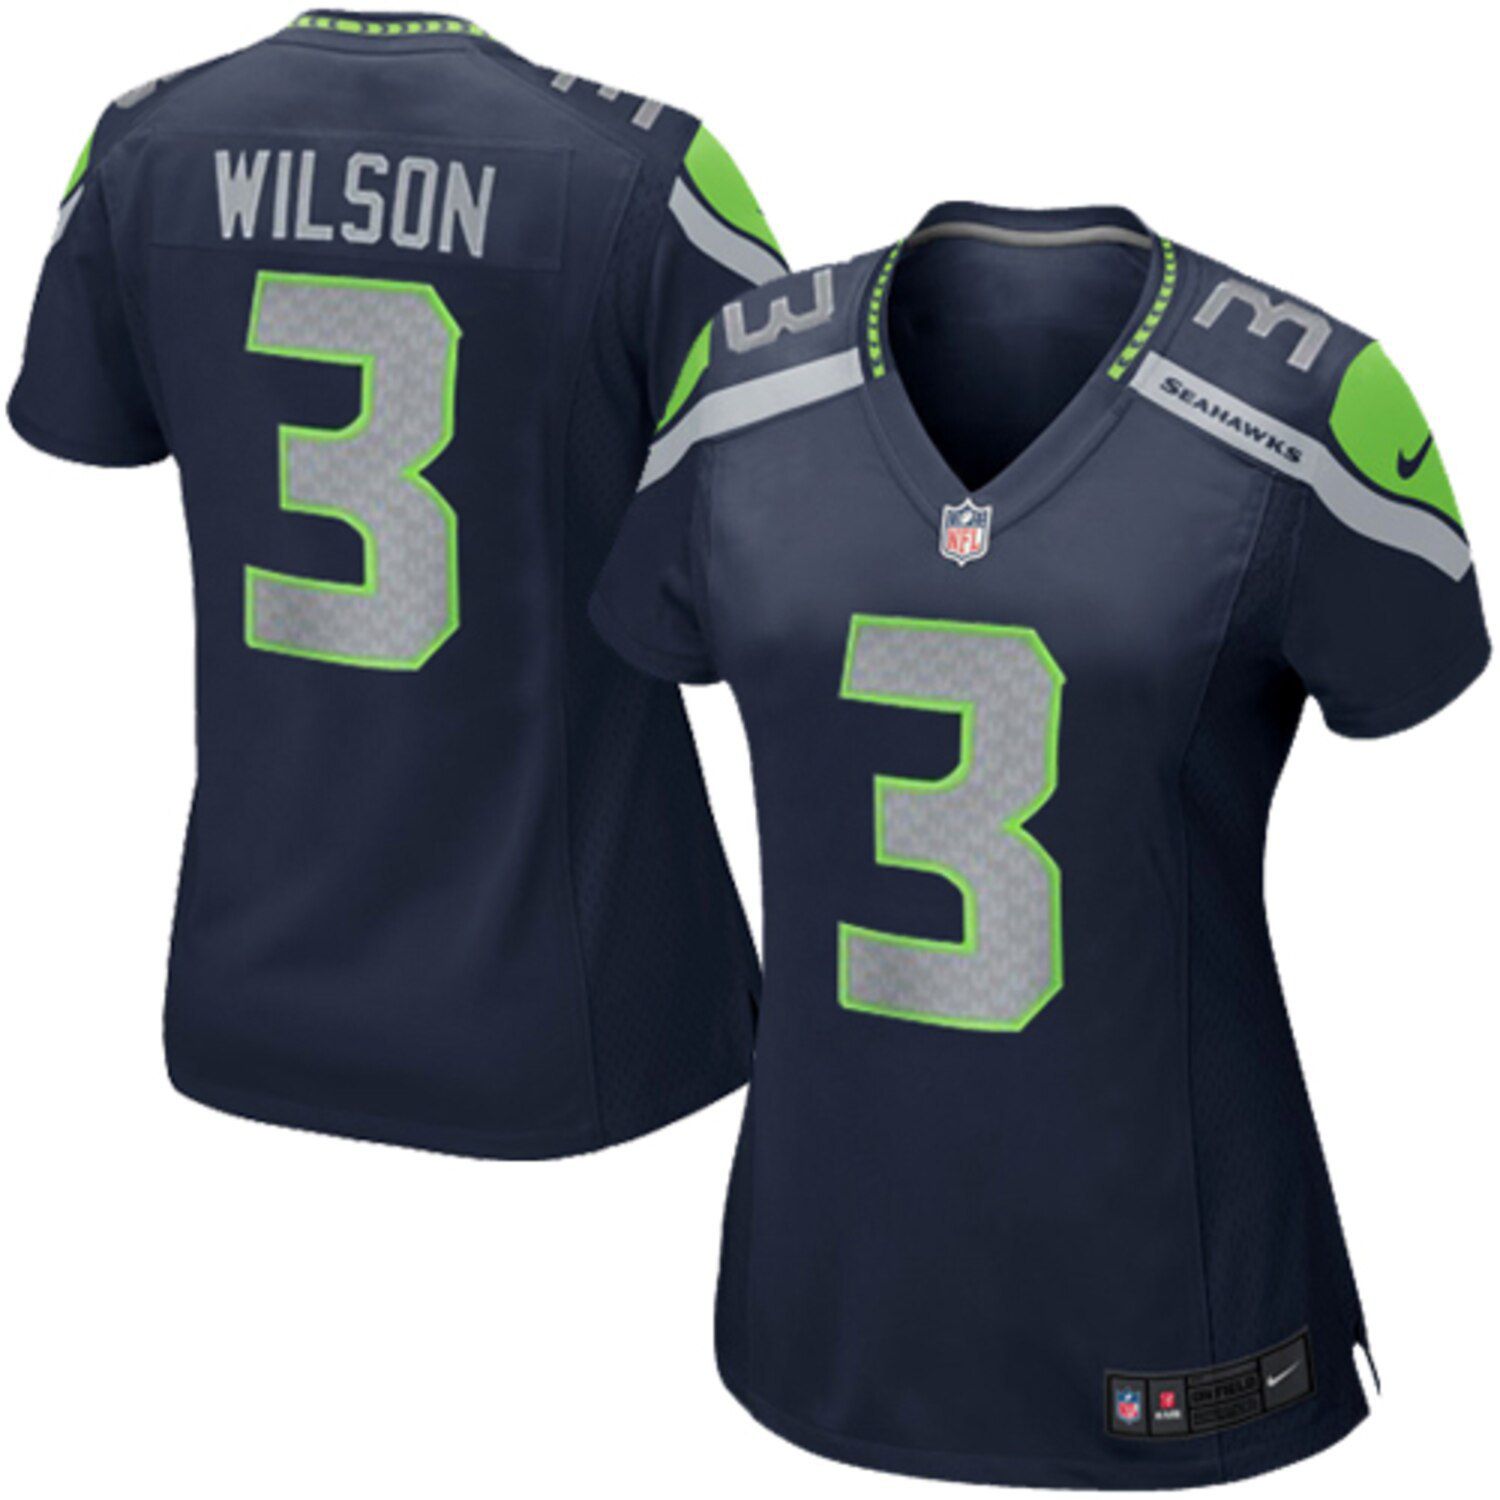 nike youth russell wilson jersey